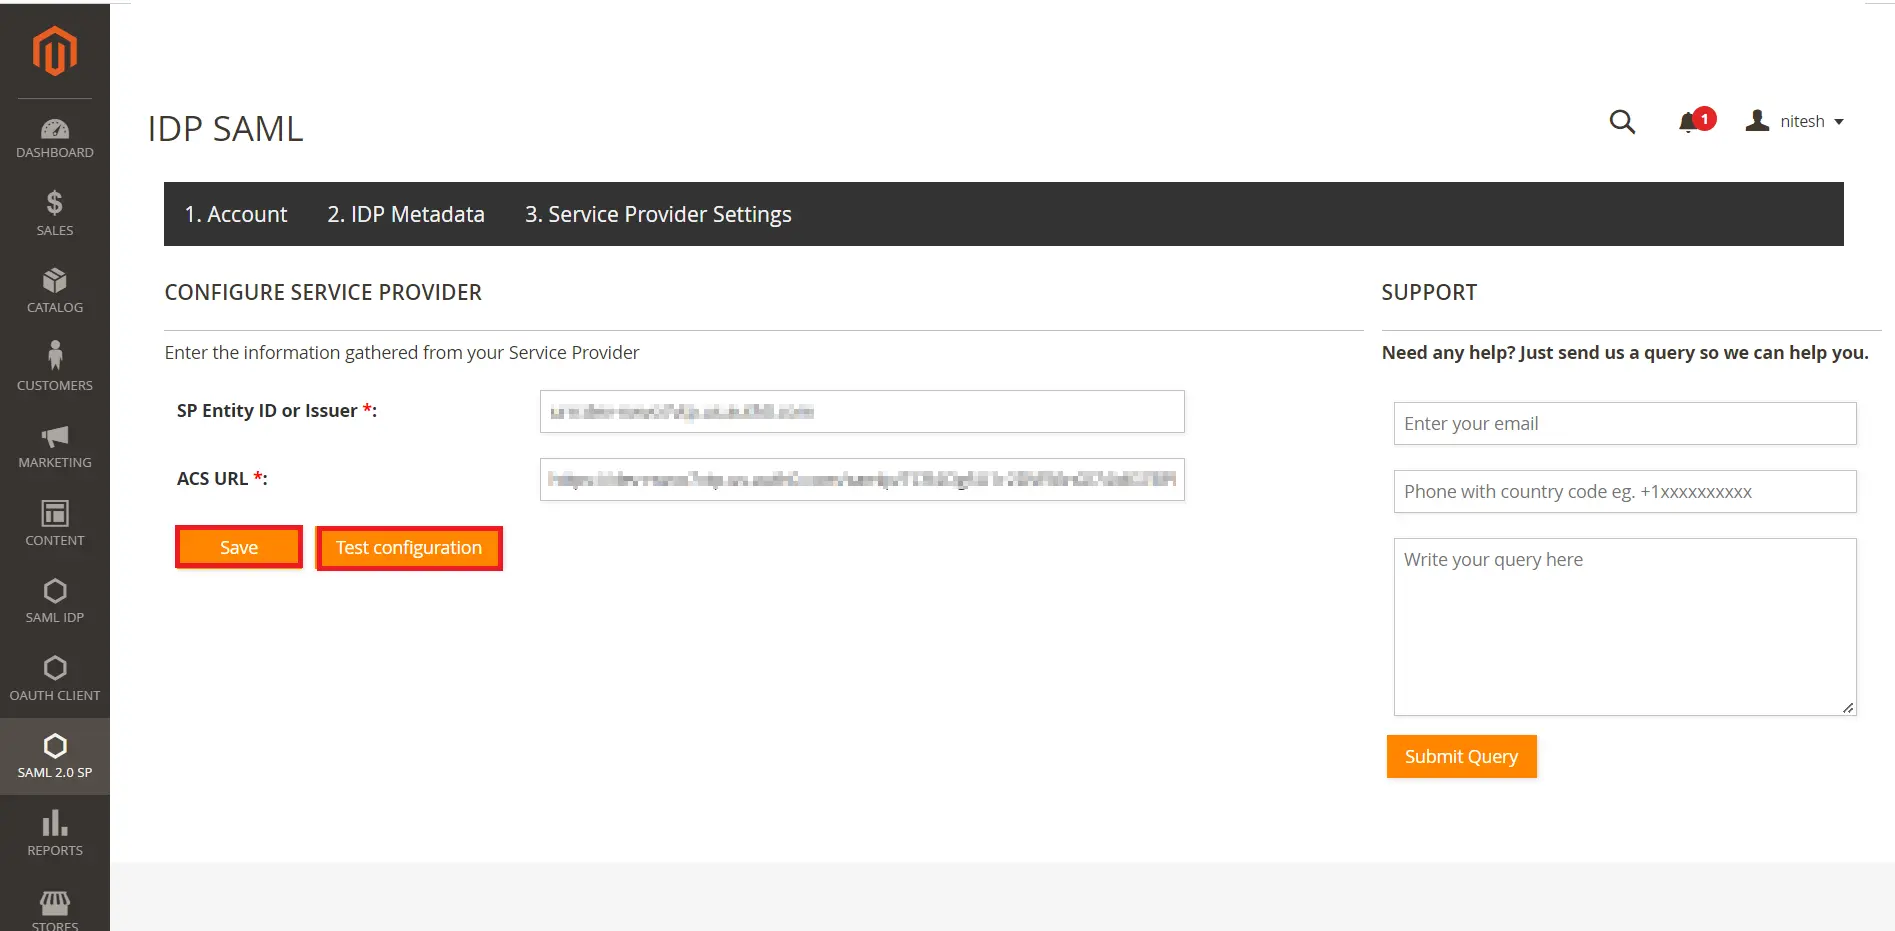 Login with magento users sav and test configuration